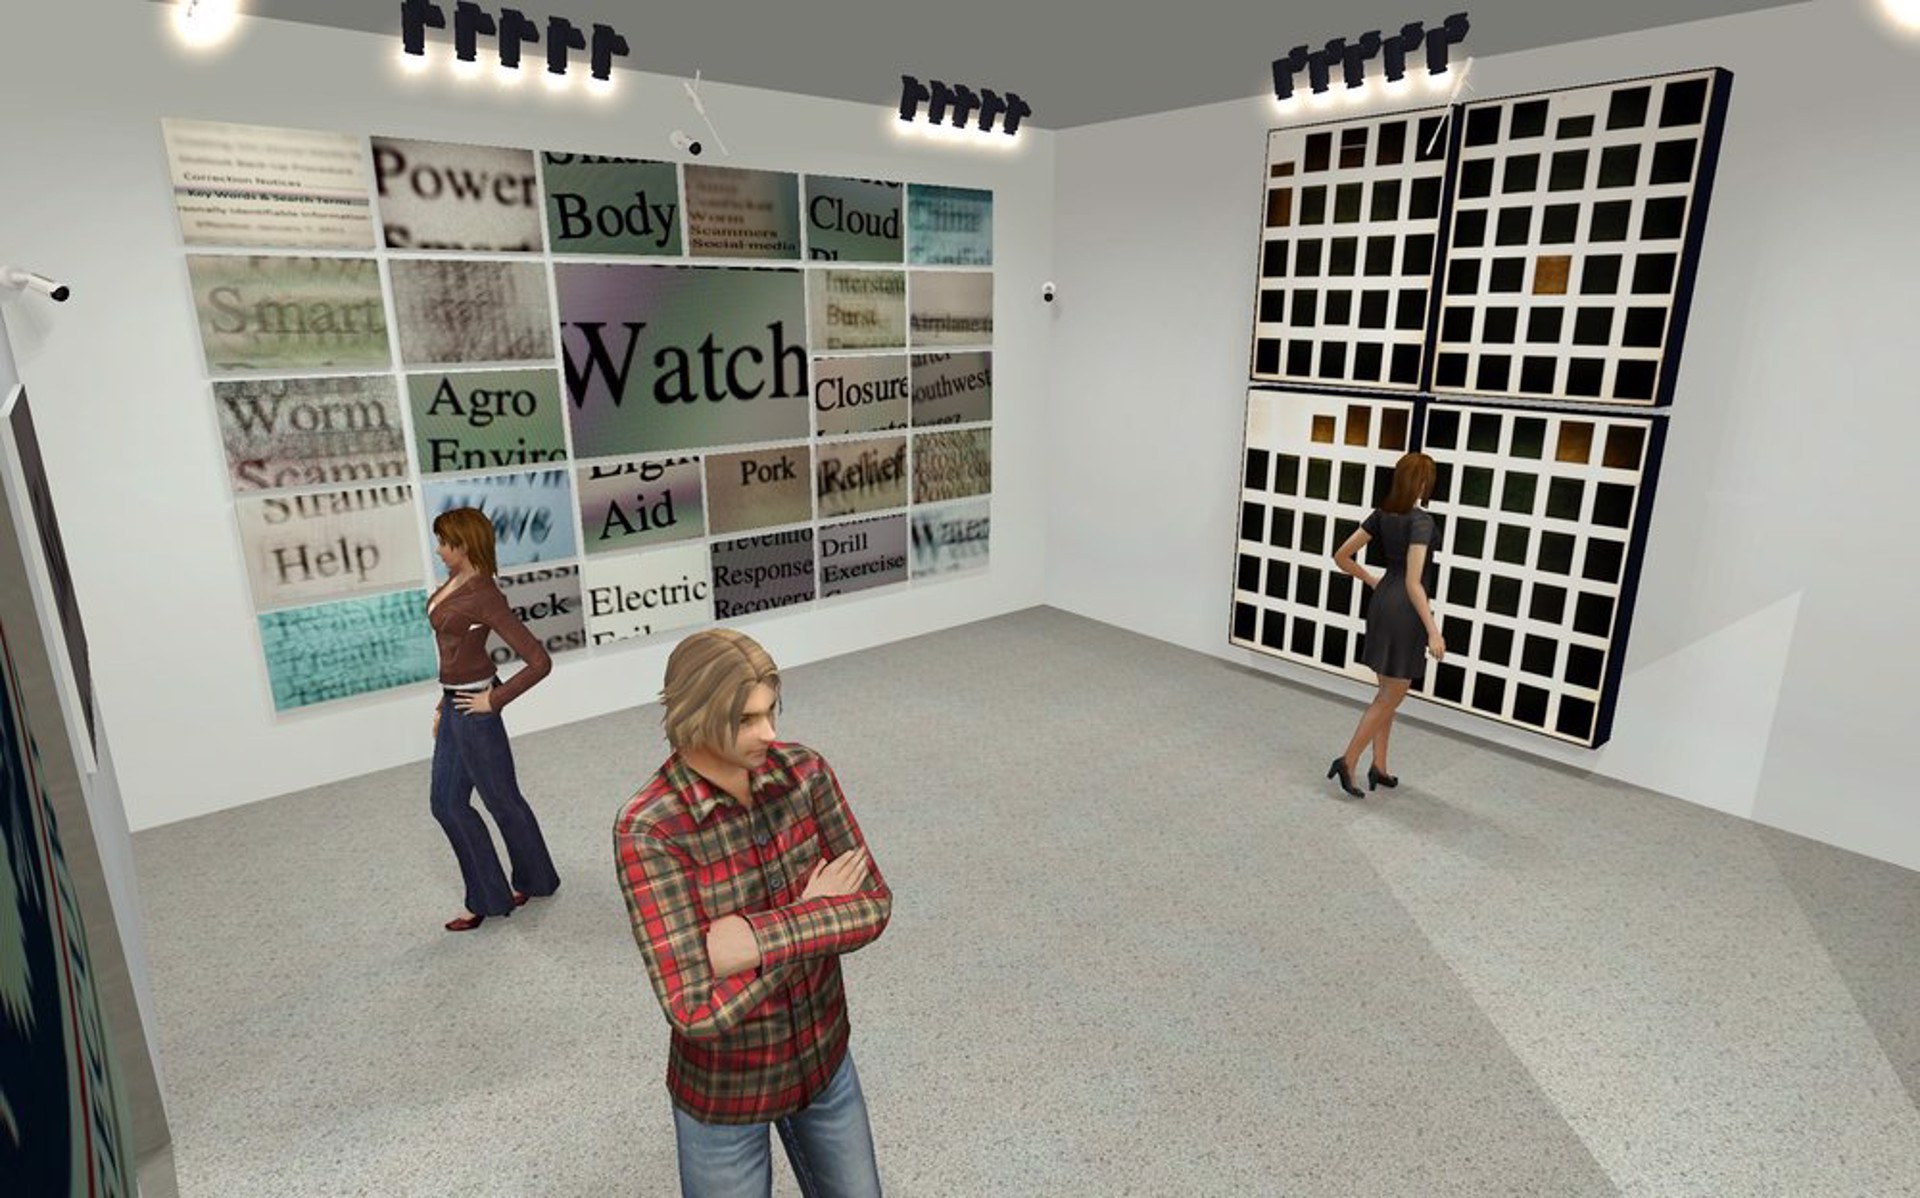 installation view (rendering) by Sol Hill